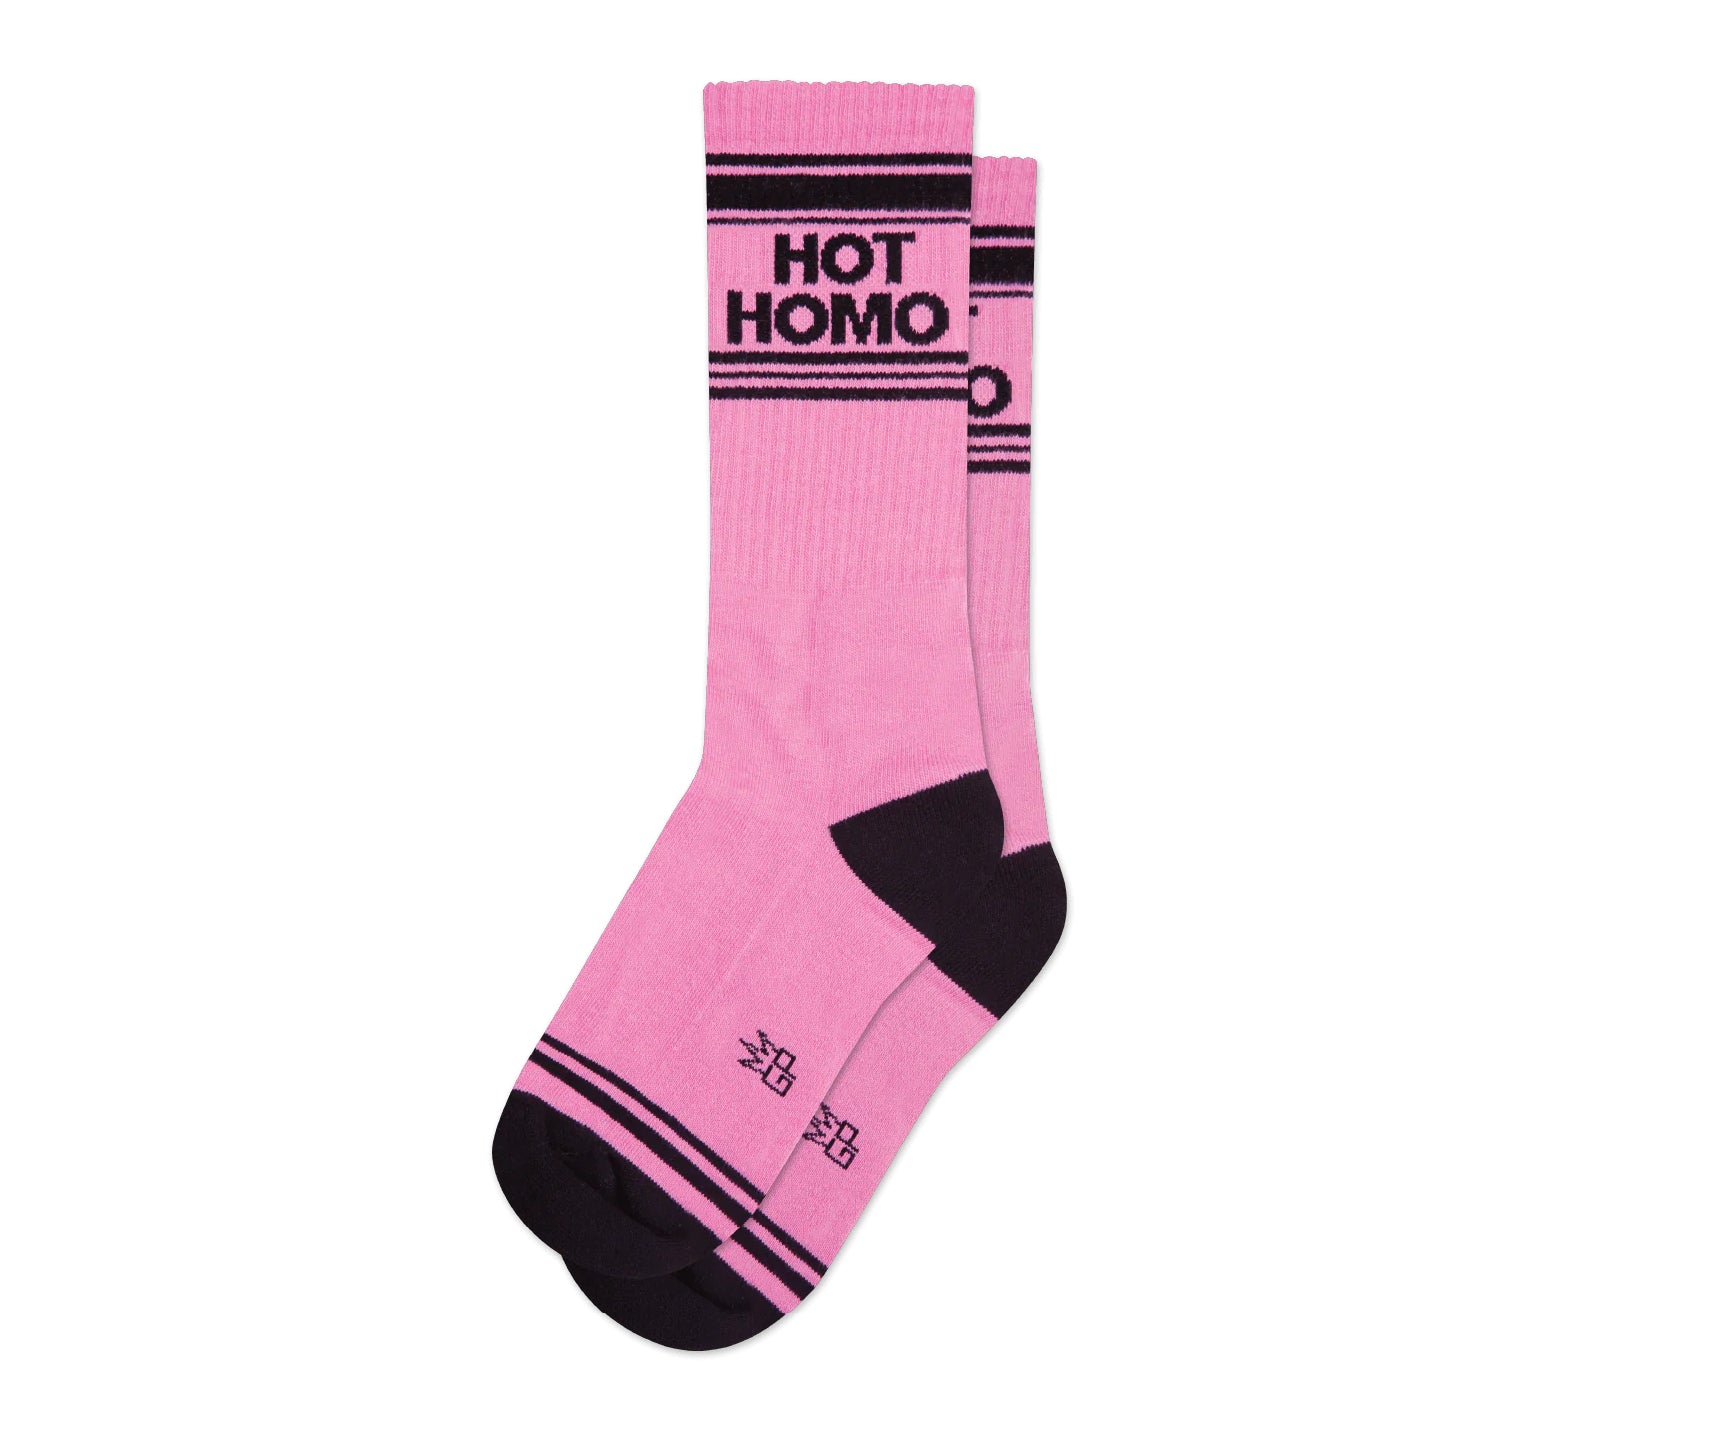 A pair of hot pink and black crew socks that read "hot homo" with the Gumball Poodle logo along the arch.